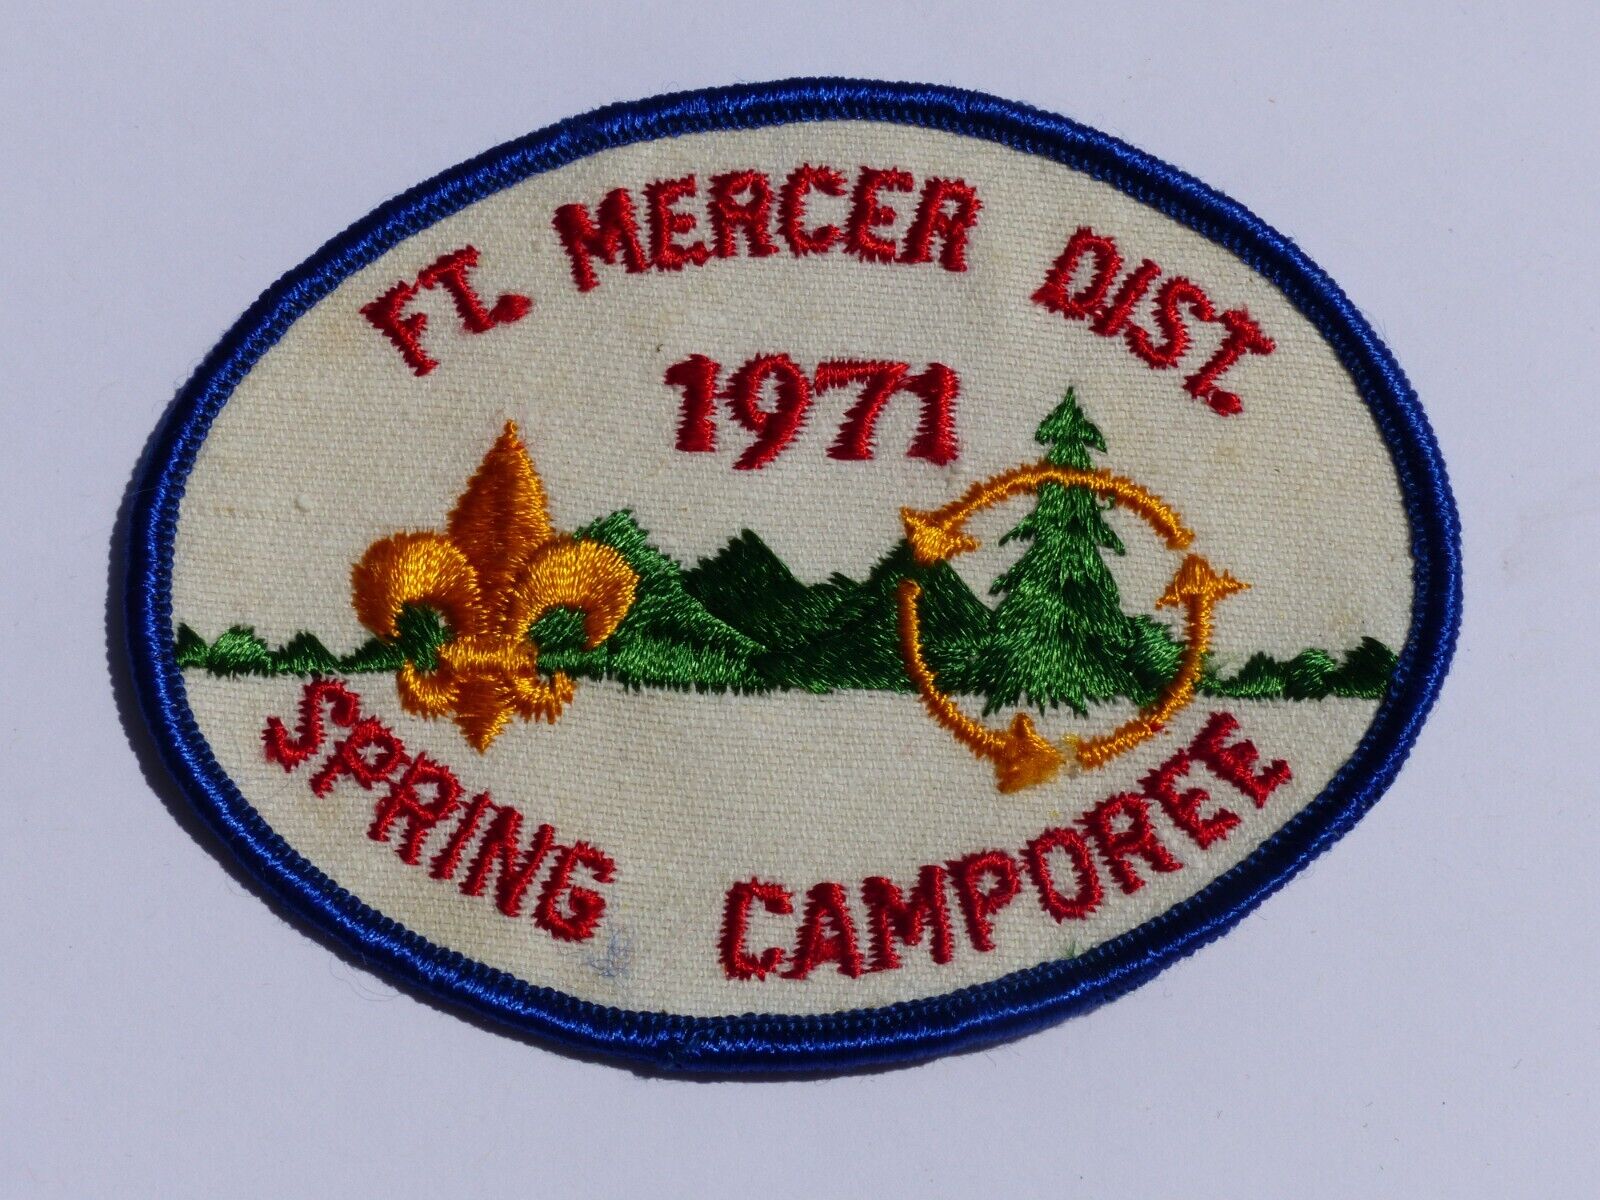 Unused 1971 Fort Mercer District New Jersey Spring Camporee Boy Scout BSA Patch